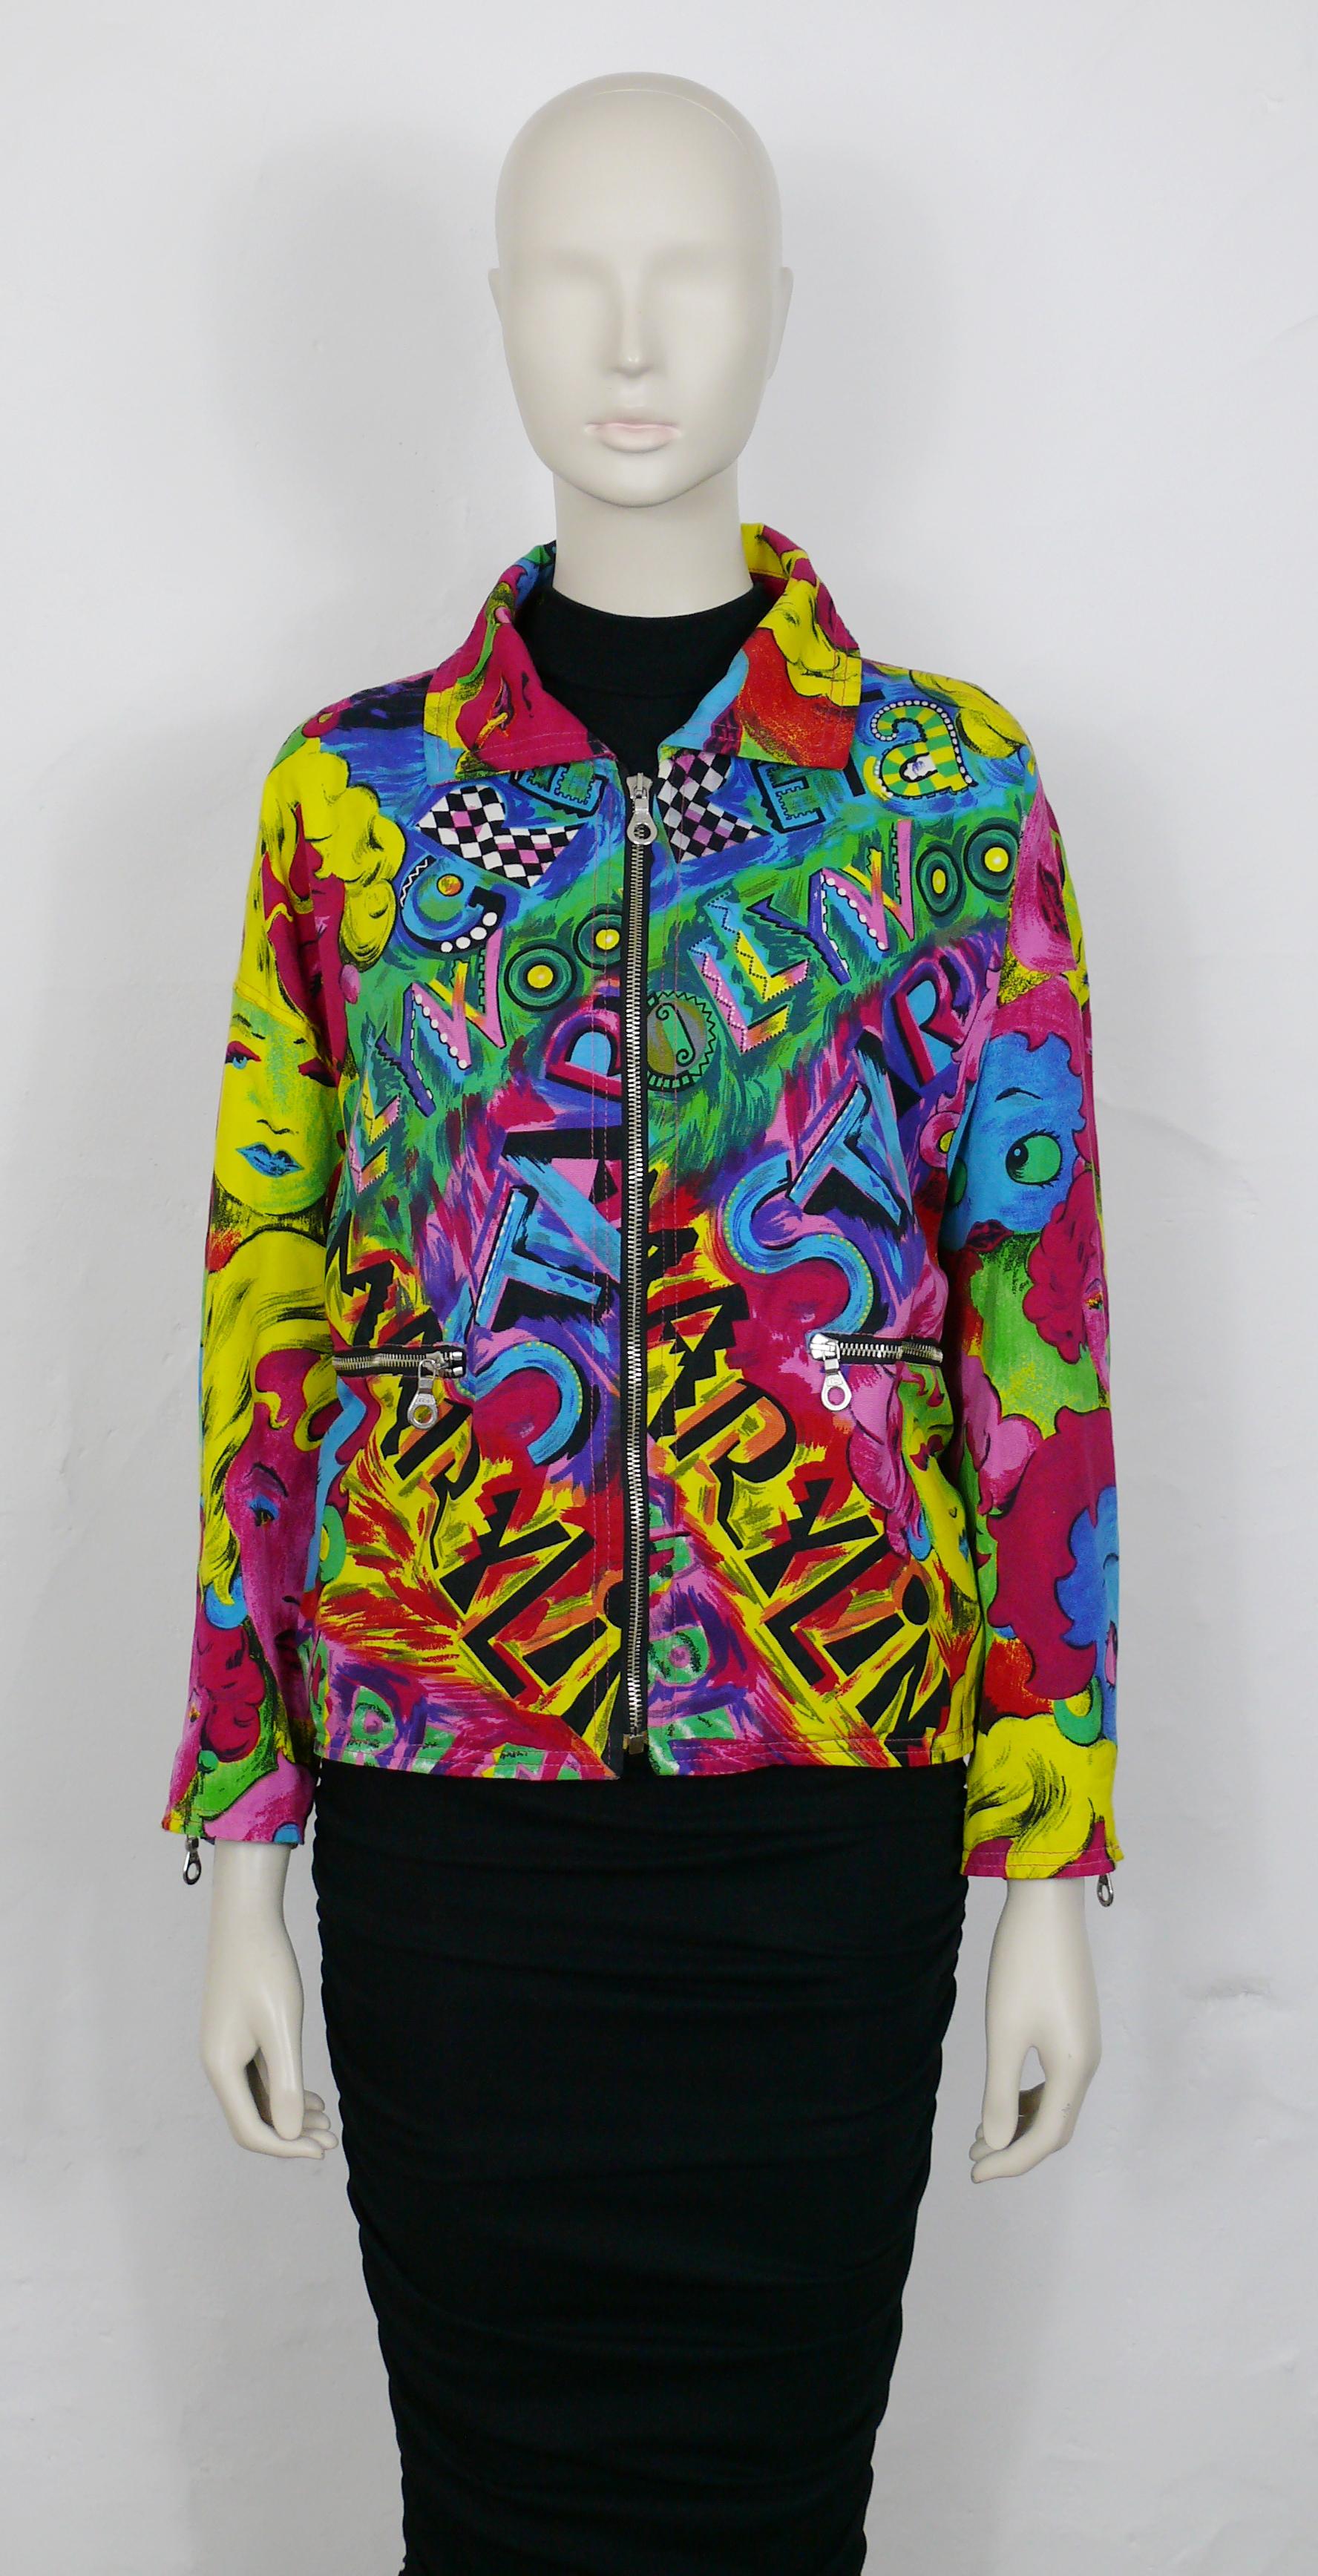 VERSACE JEANS COUTURE vintage rare oversized bomber moto jacket featuring ANDY WARHOL's style portrait prints in vibrant colors of MARYILYN MONROE and BETTY BOOP all over.

Spring/Summer 1991 Collection.

Label reads VERSACE JEANS COUTURE.
MADE IN